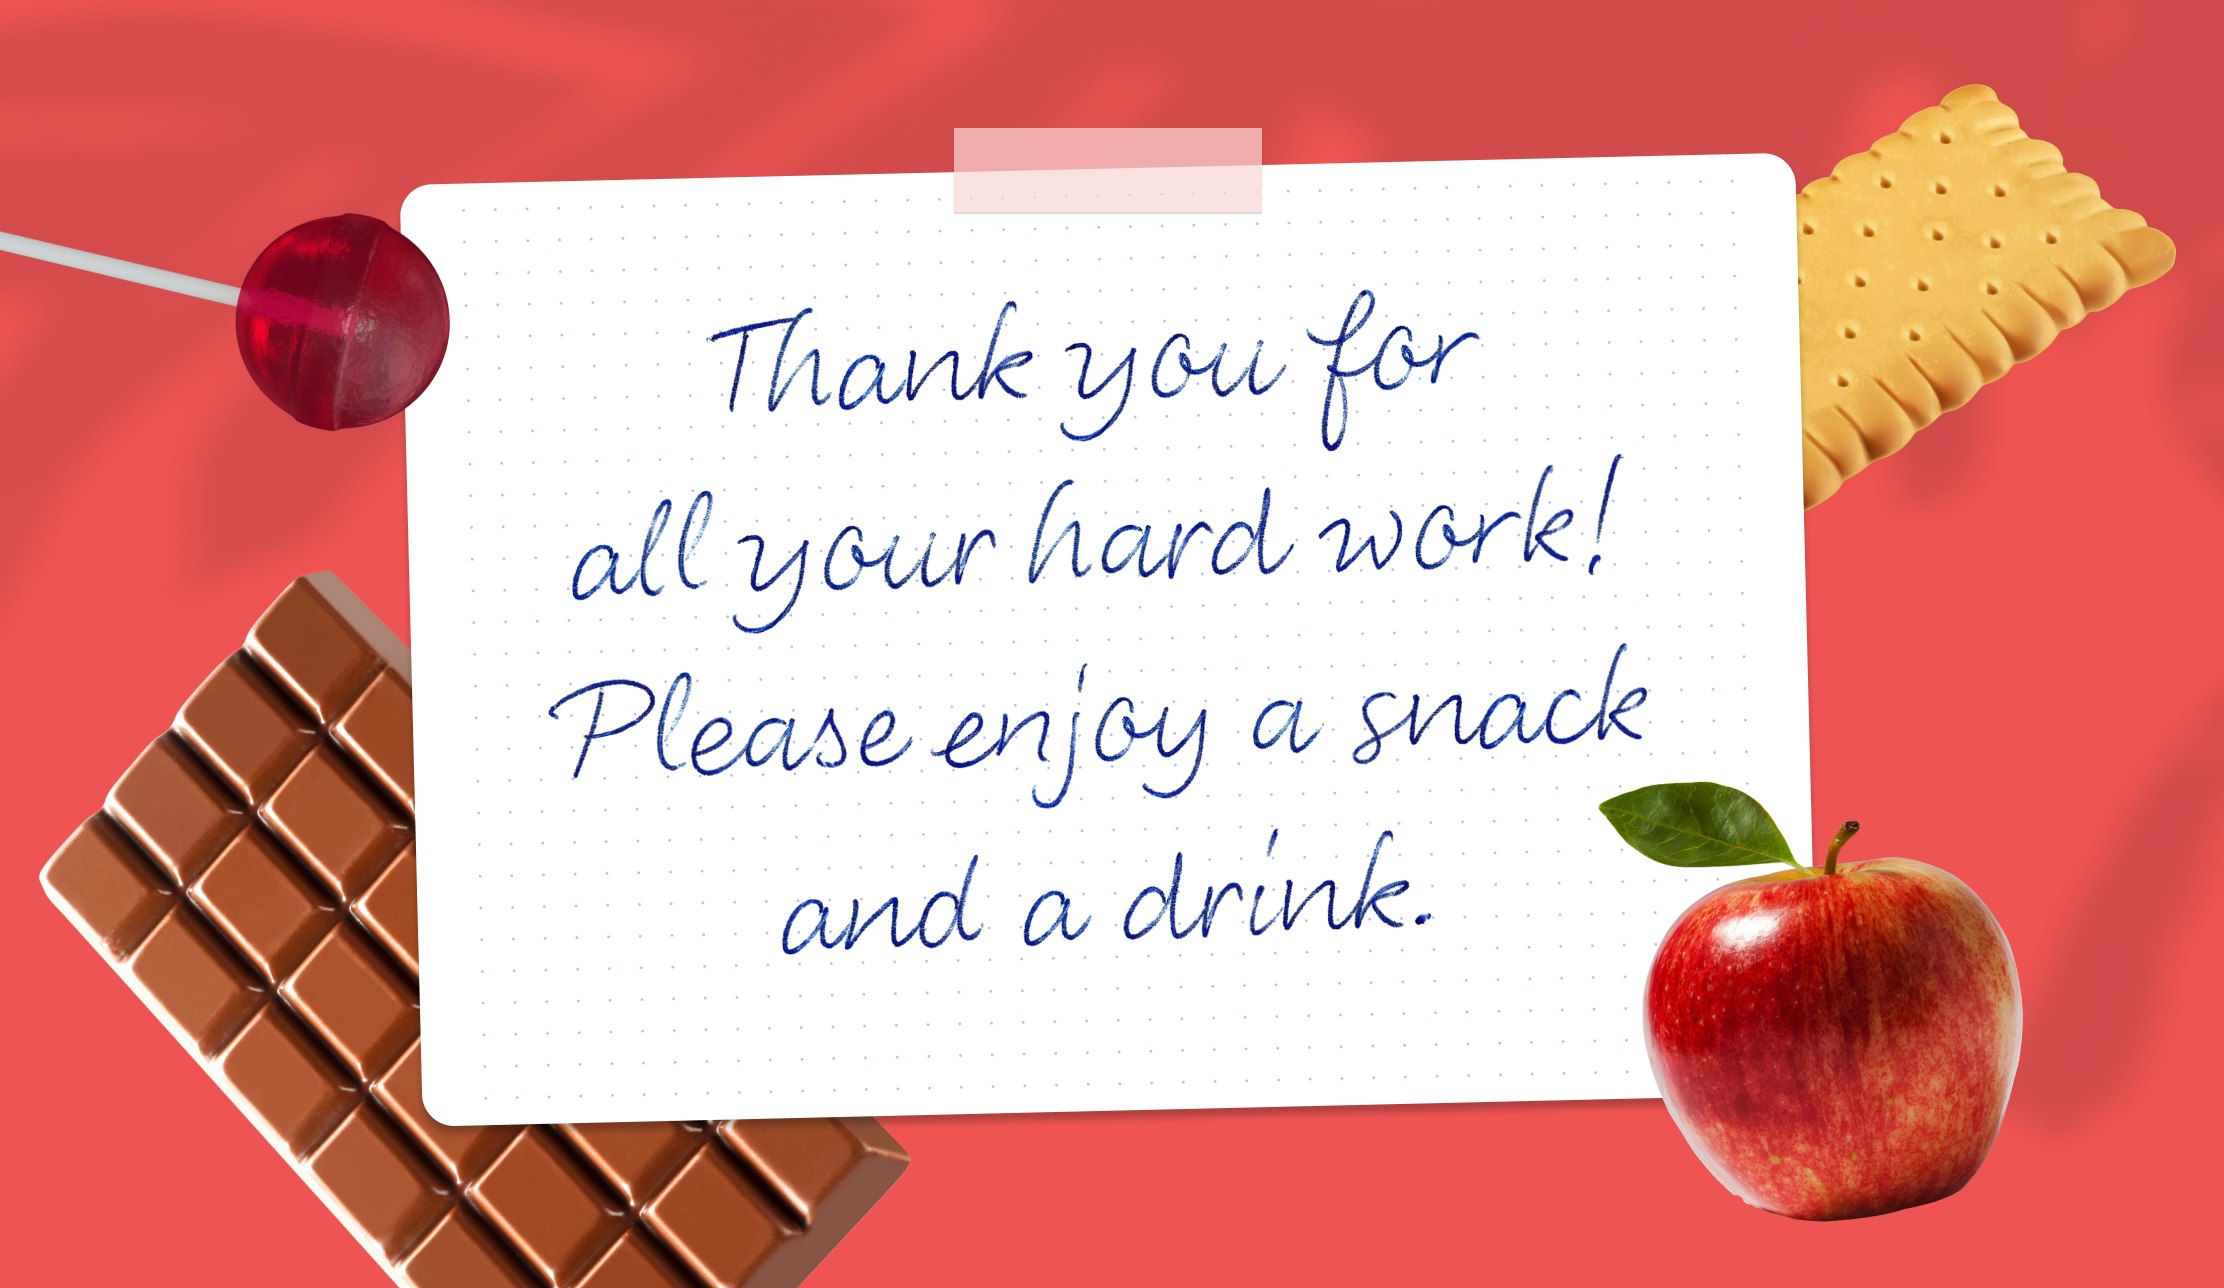 Thank you for all your hard work! Please enjoy a snack and a drink